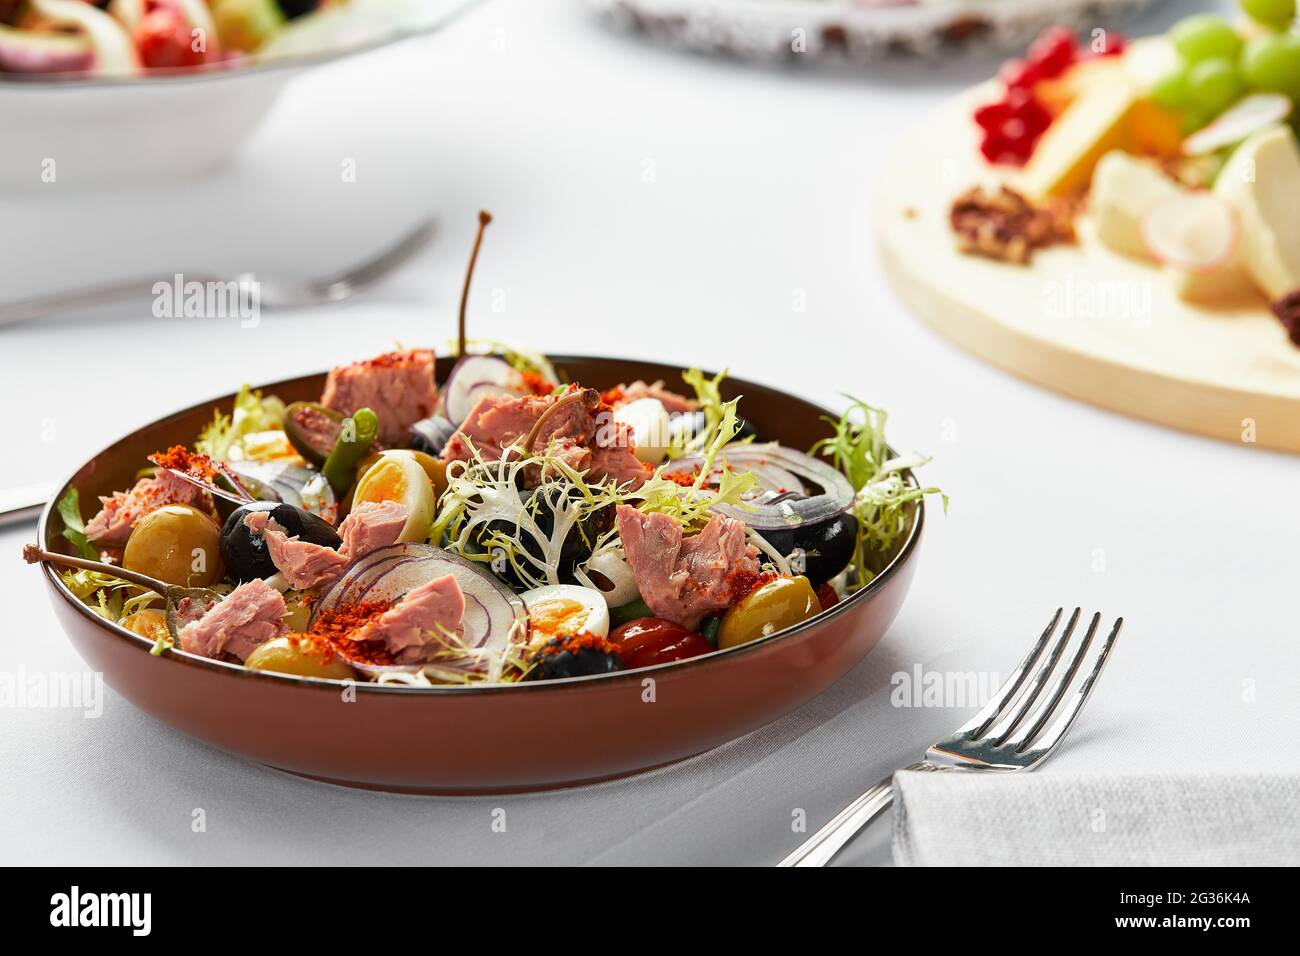 Nicoise salad on the banquet table, classic nicoise salad served by the chef in a craft plate, tuna salad with eggs and olives Stock Photo